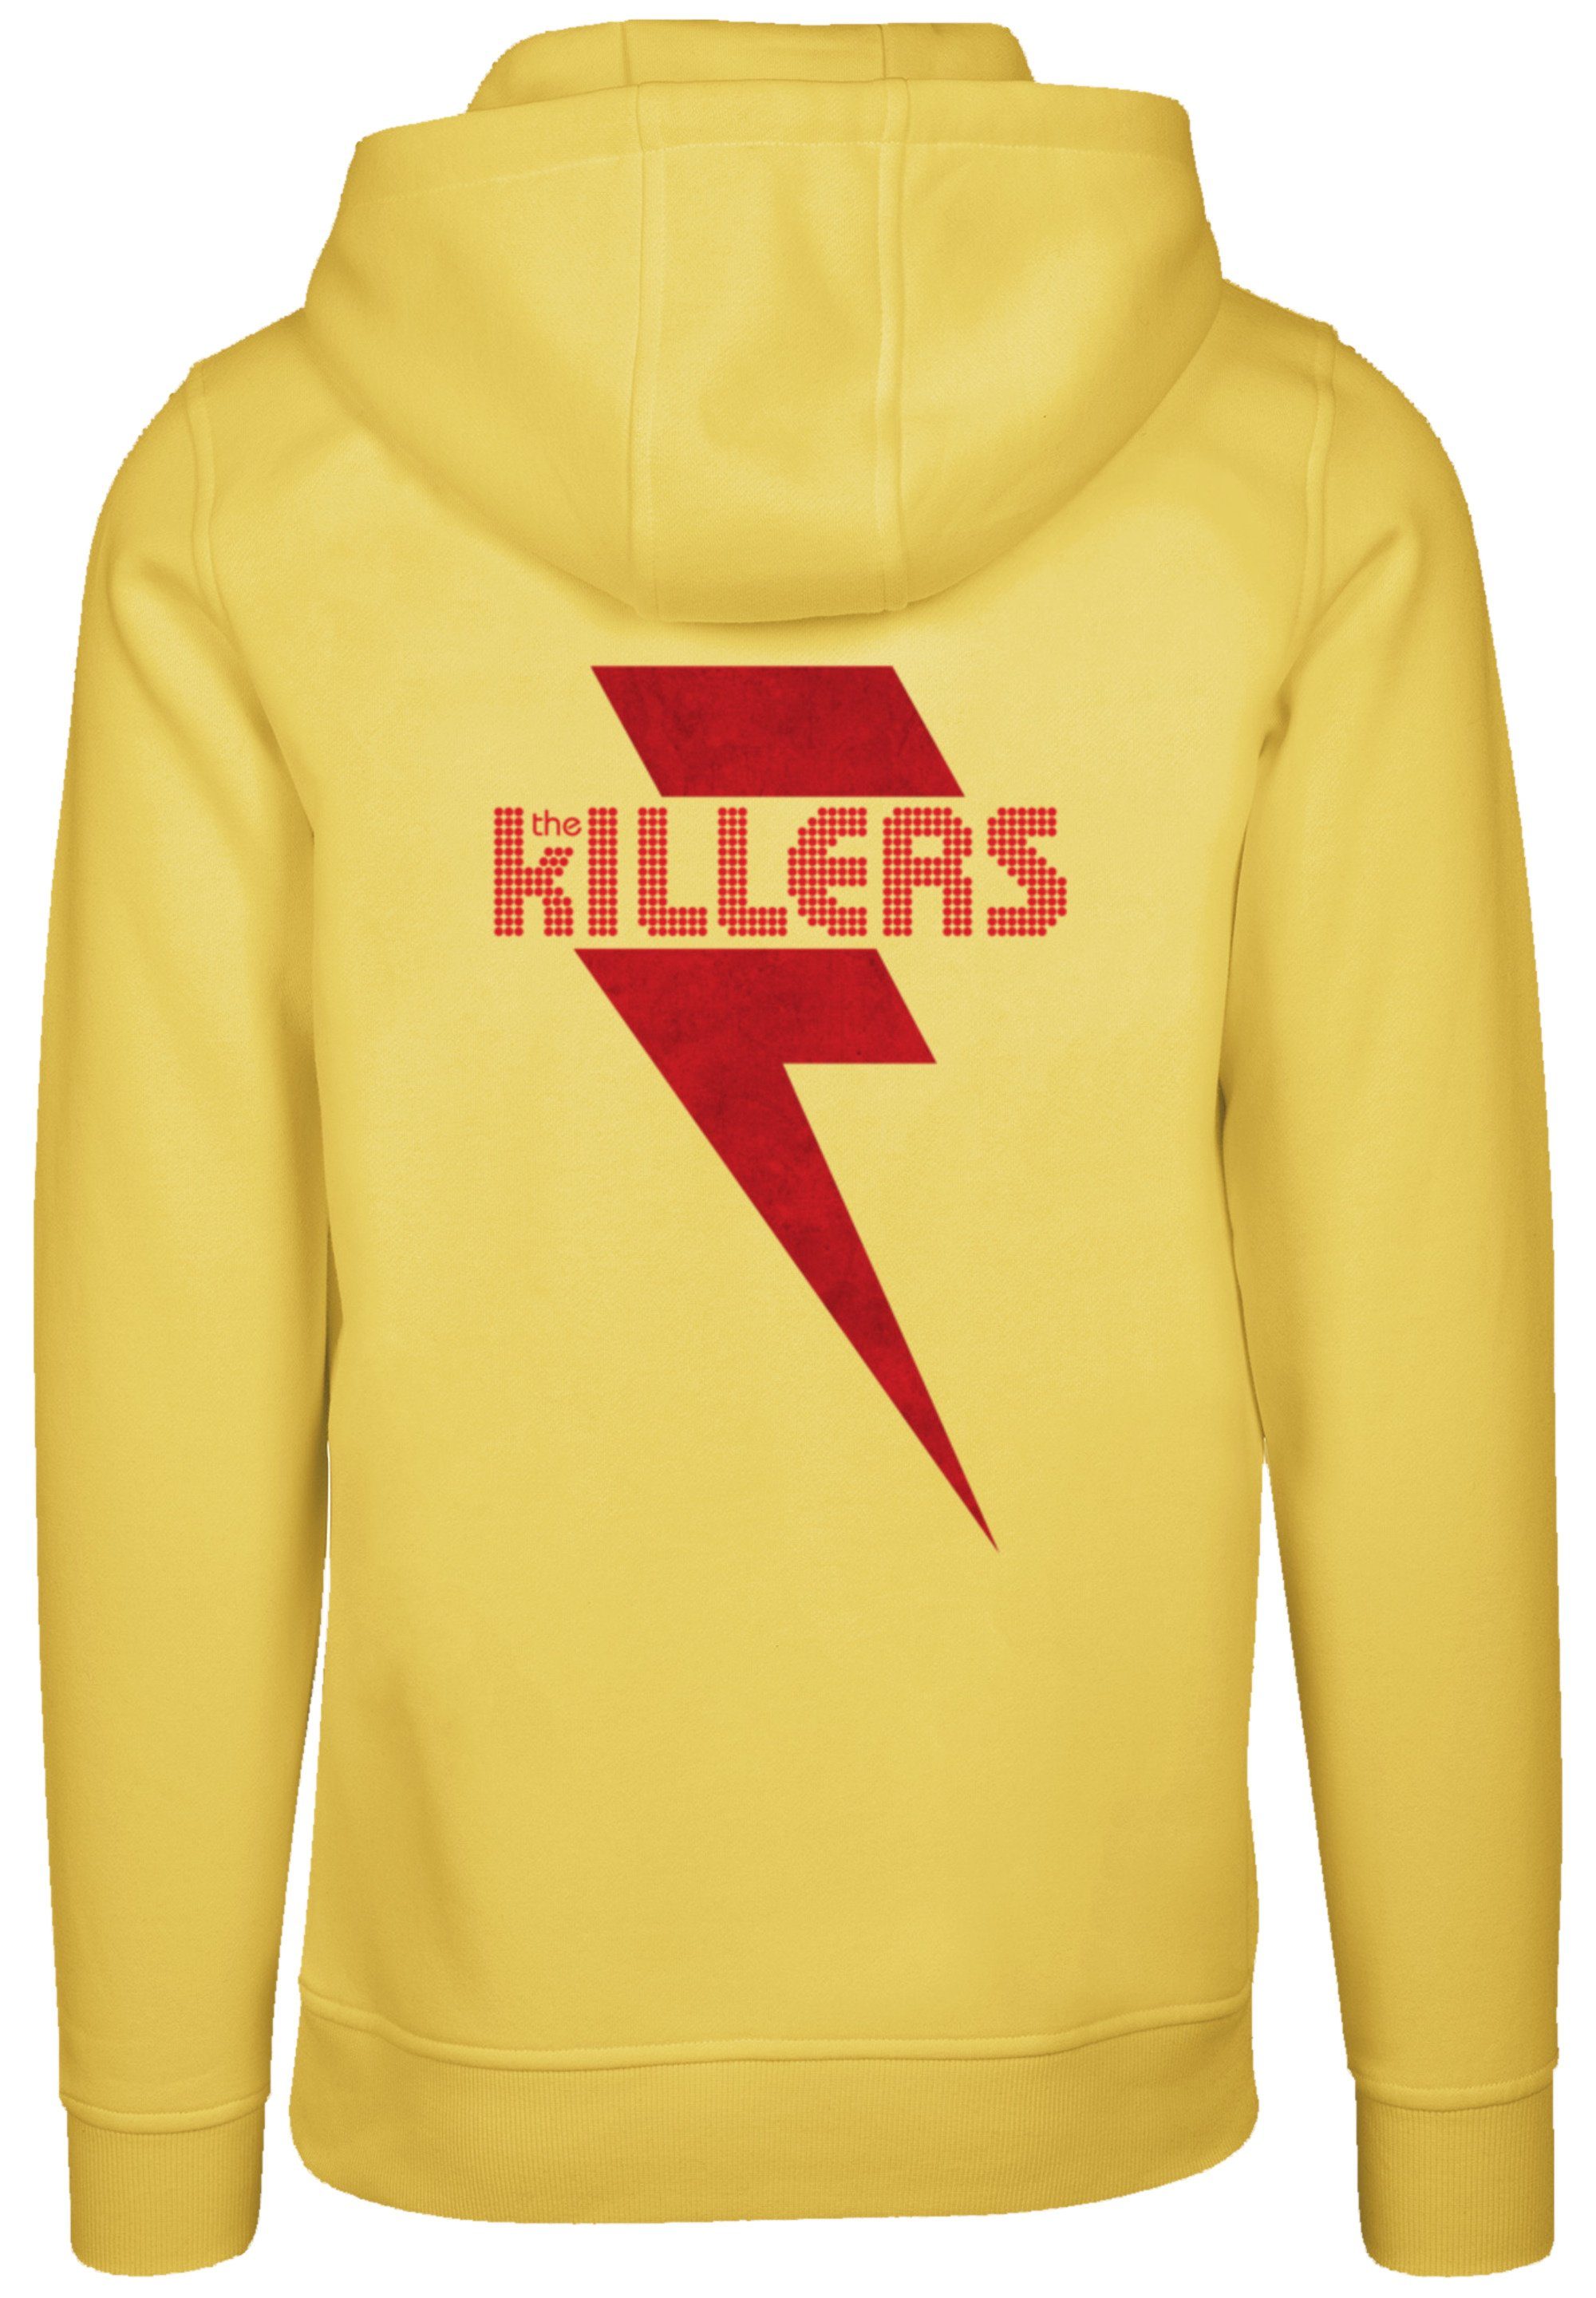 Band taxi Kapuzenpullover Killers F4NT4STIC Musik yellow Hoodie, Bequem Warm, The Rock